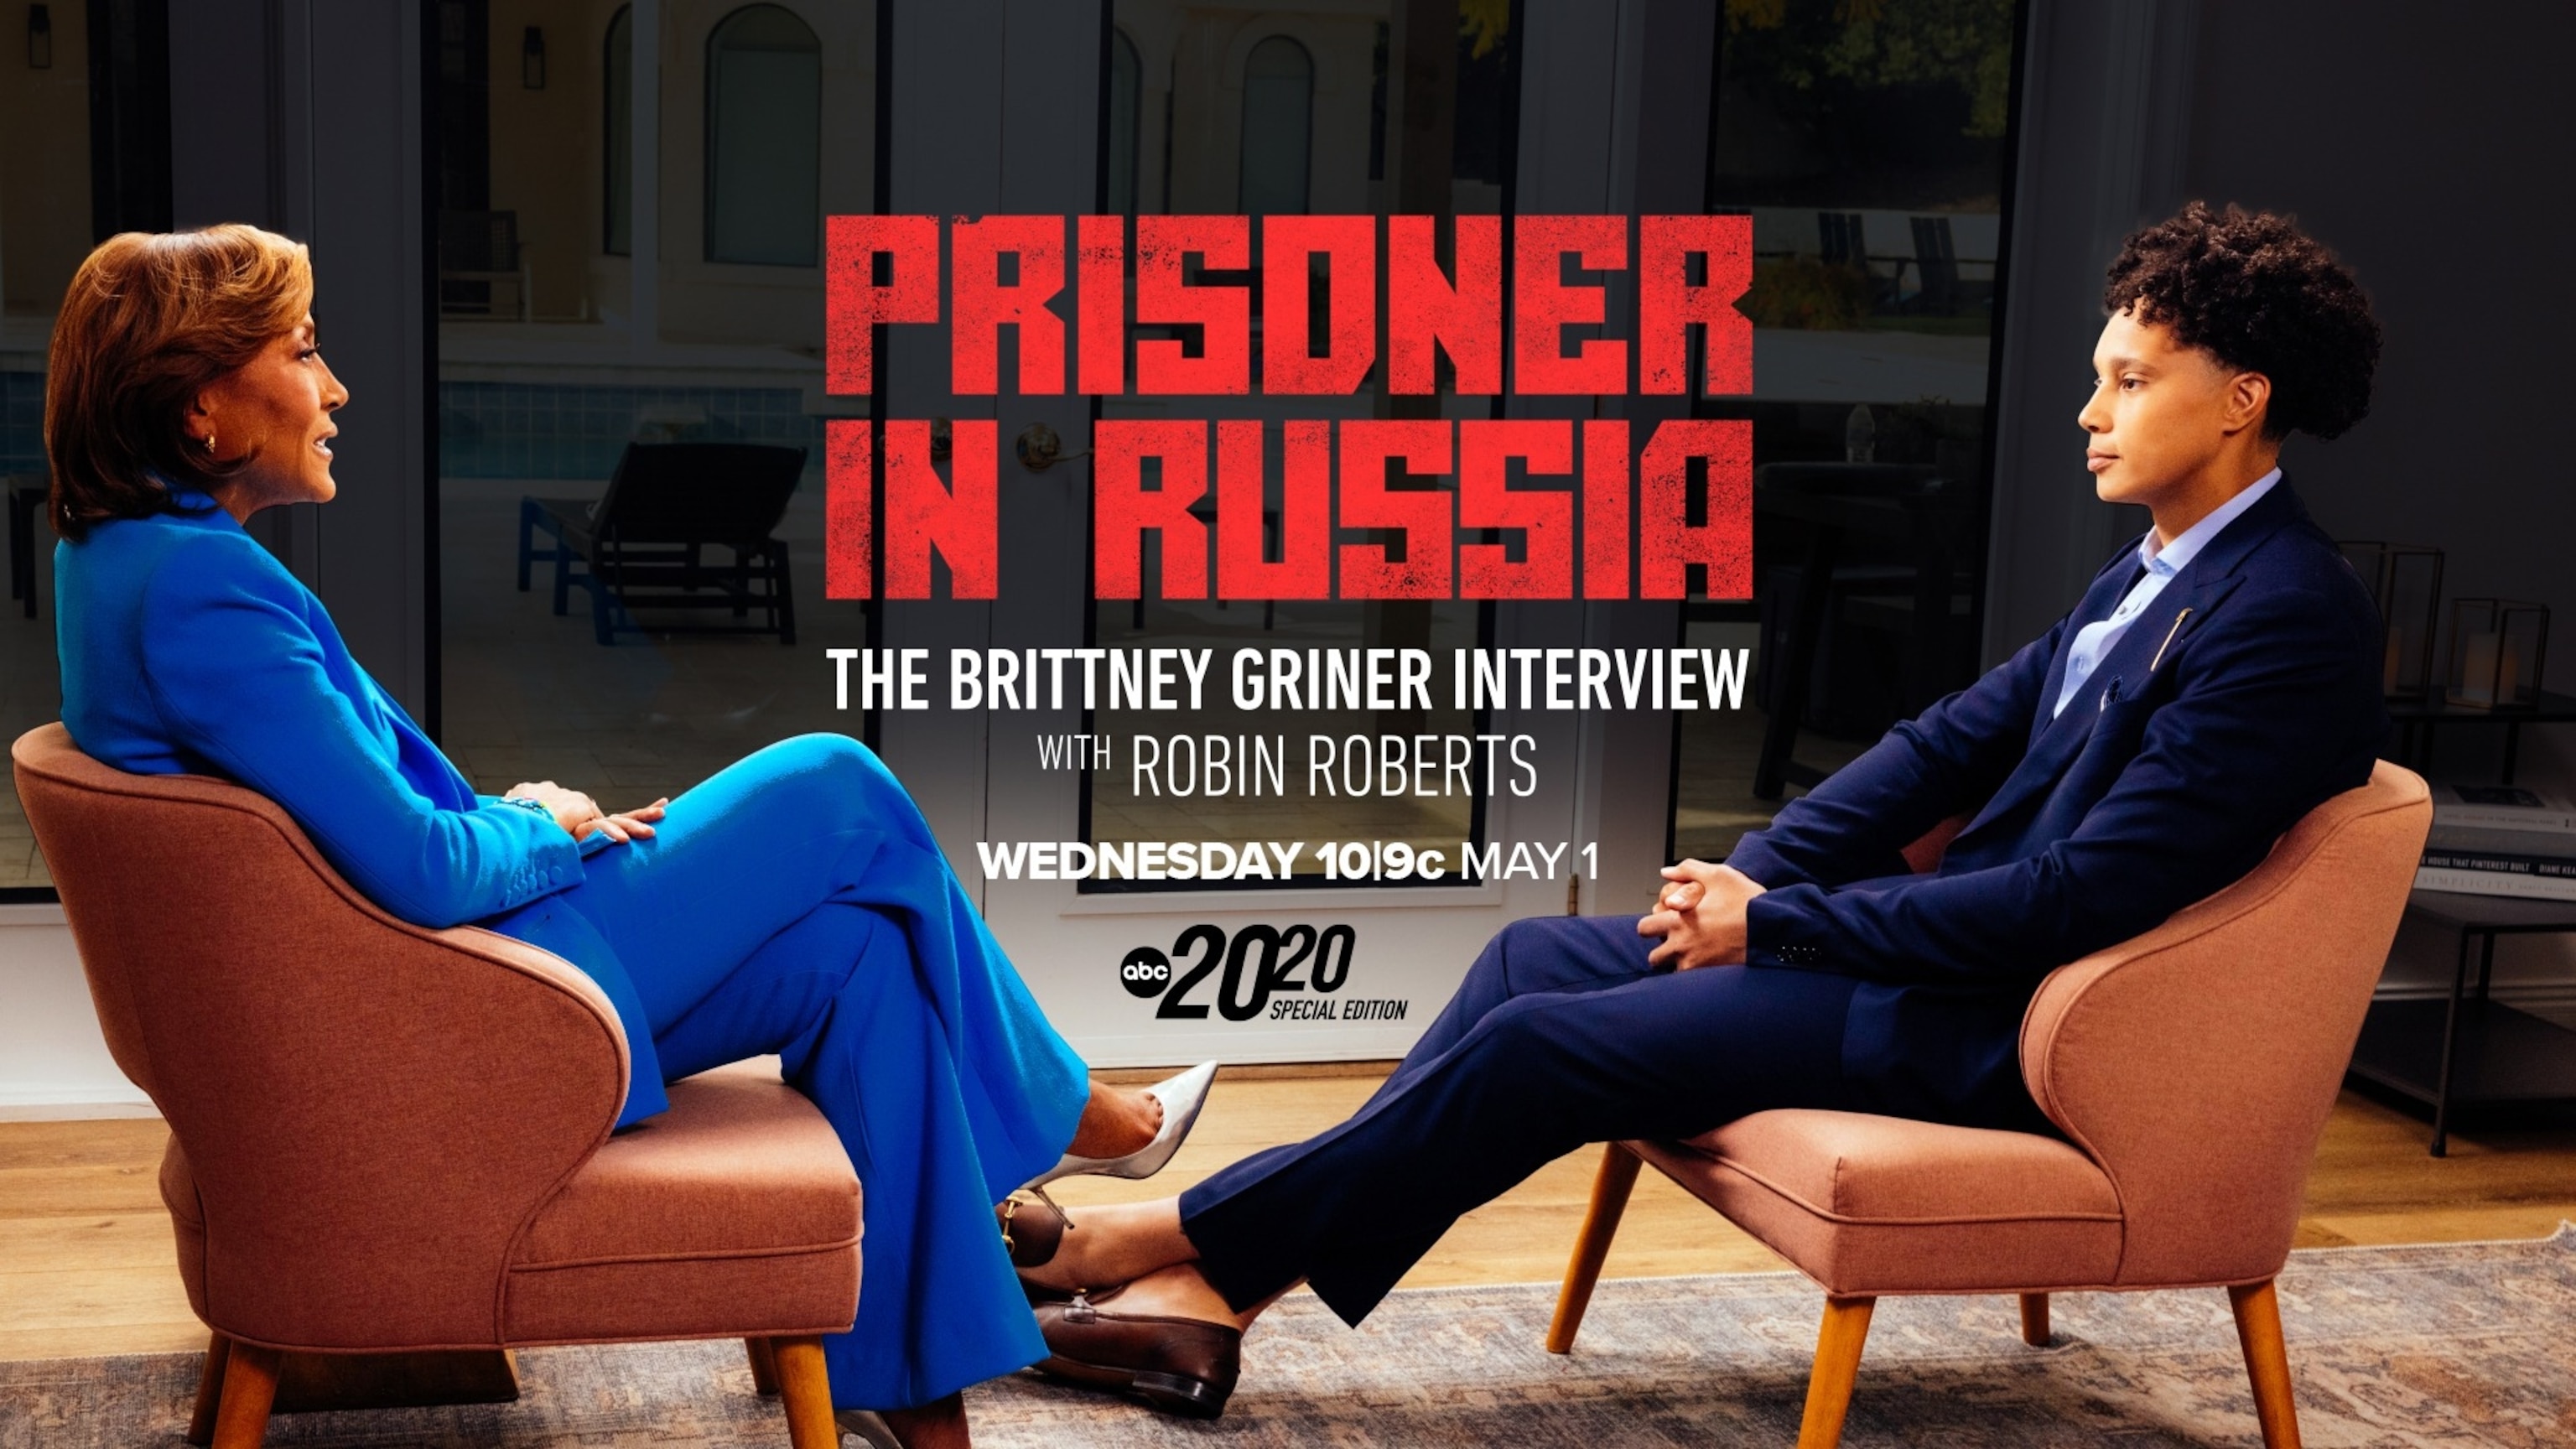 PHOTO: Prisoner in Russia: The Brittney Griner Interview with Robin Roberts.